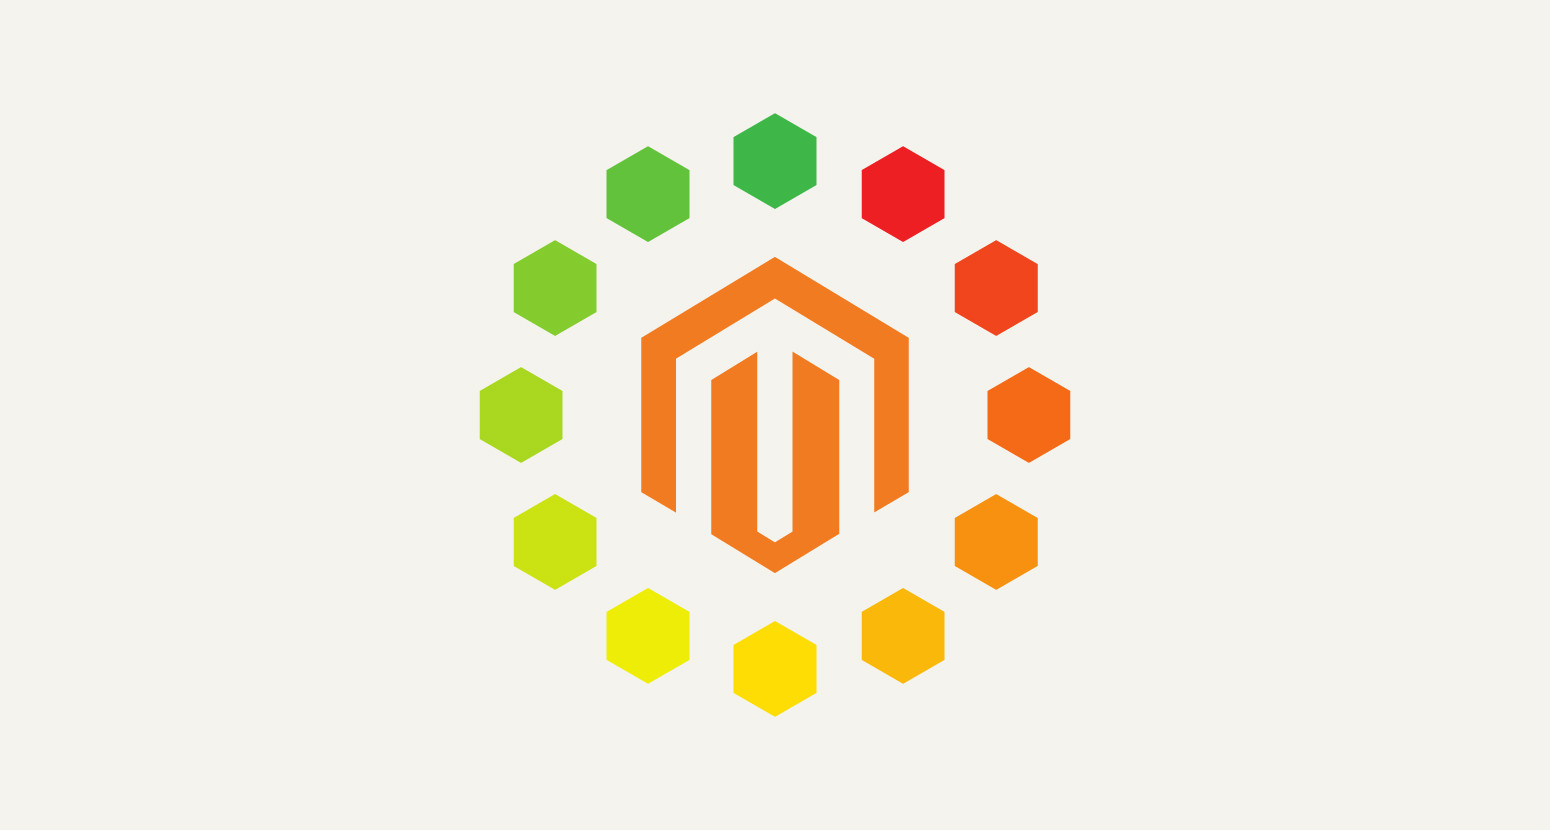 Better Magento support when you need it most